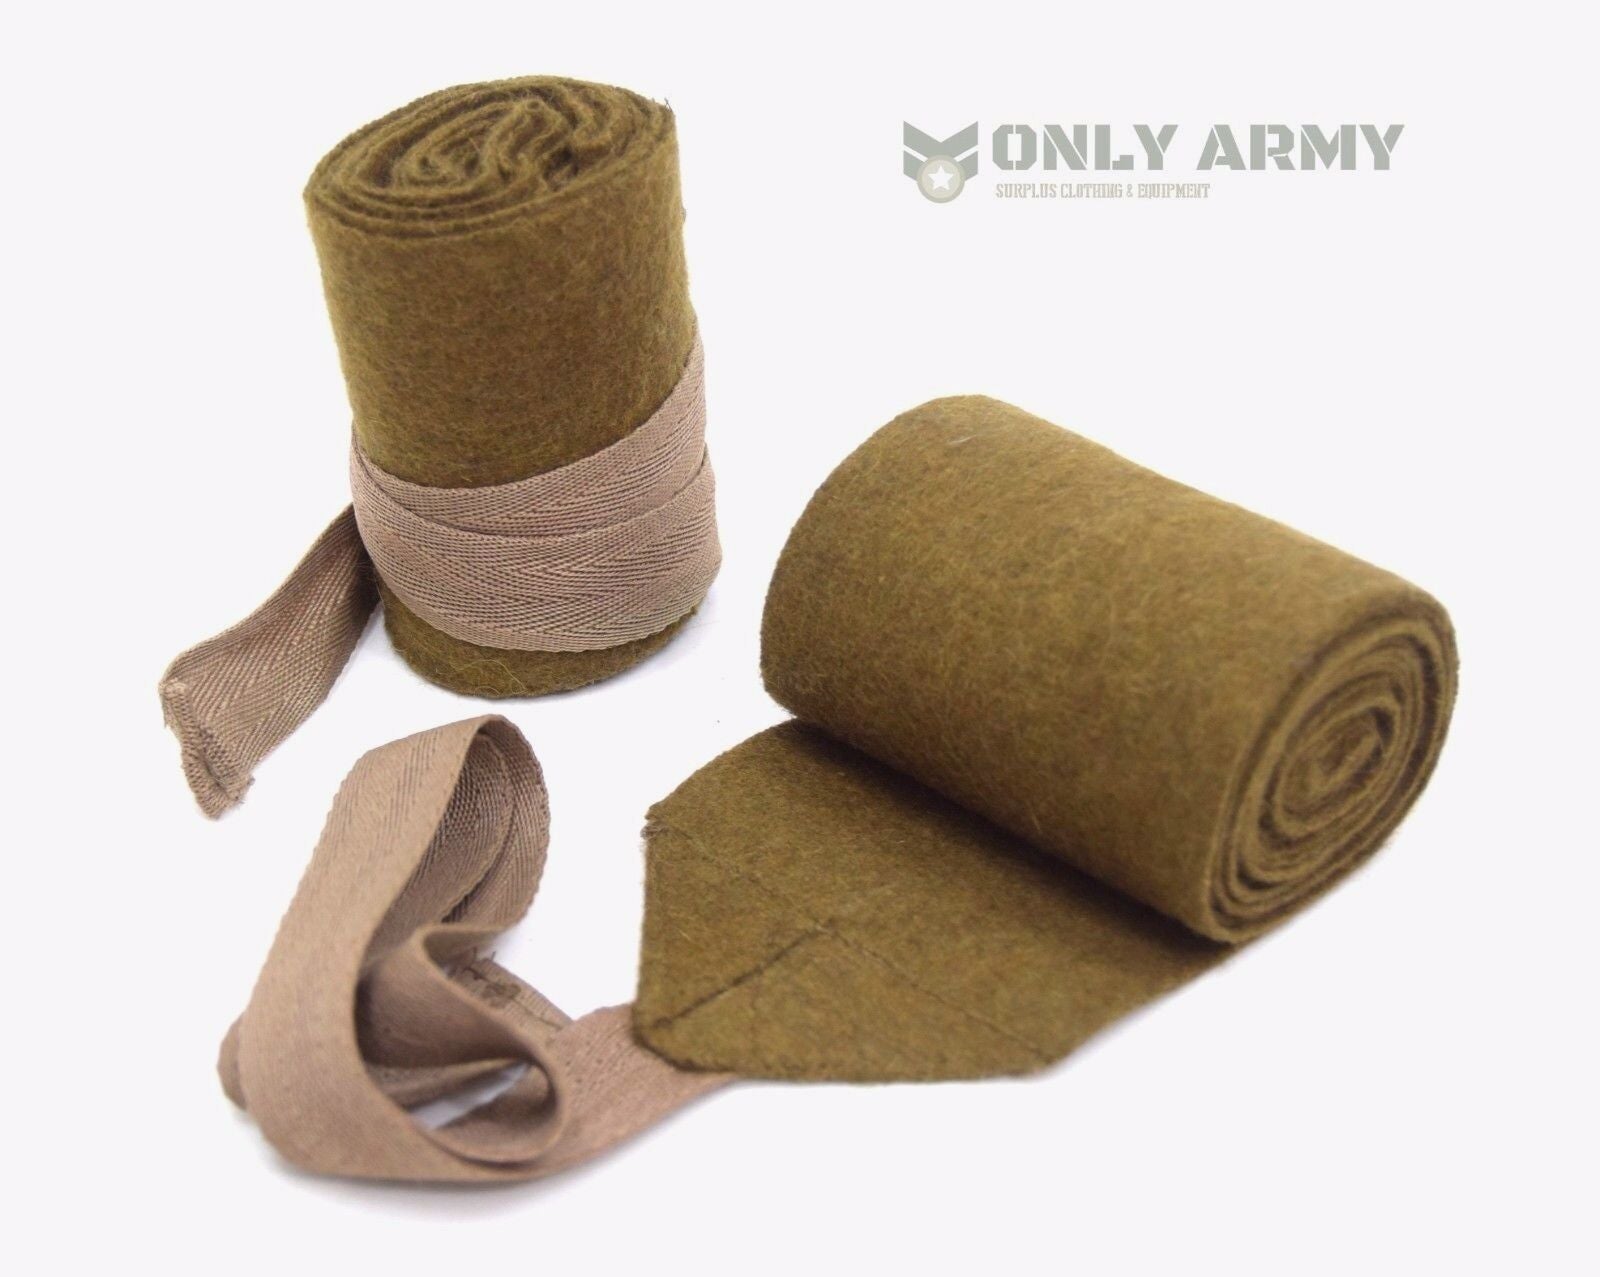 1940's WW2 British Army Style Puttees Extra Long Wool Wraps Gaiters Military